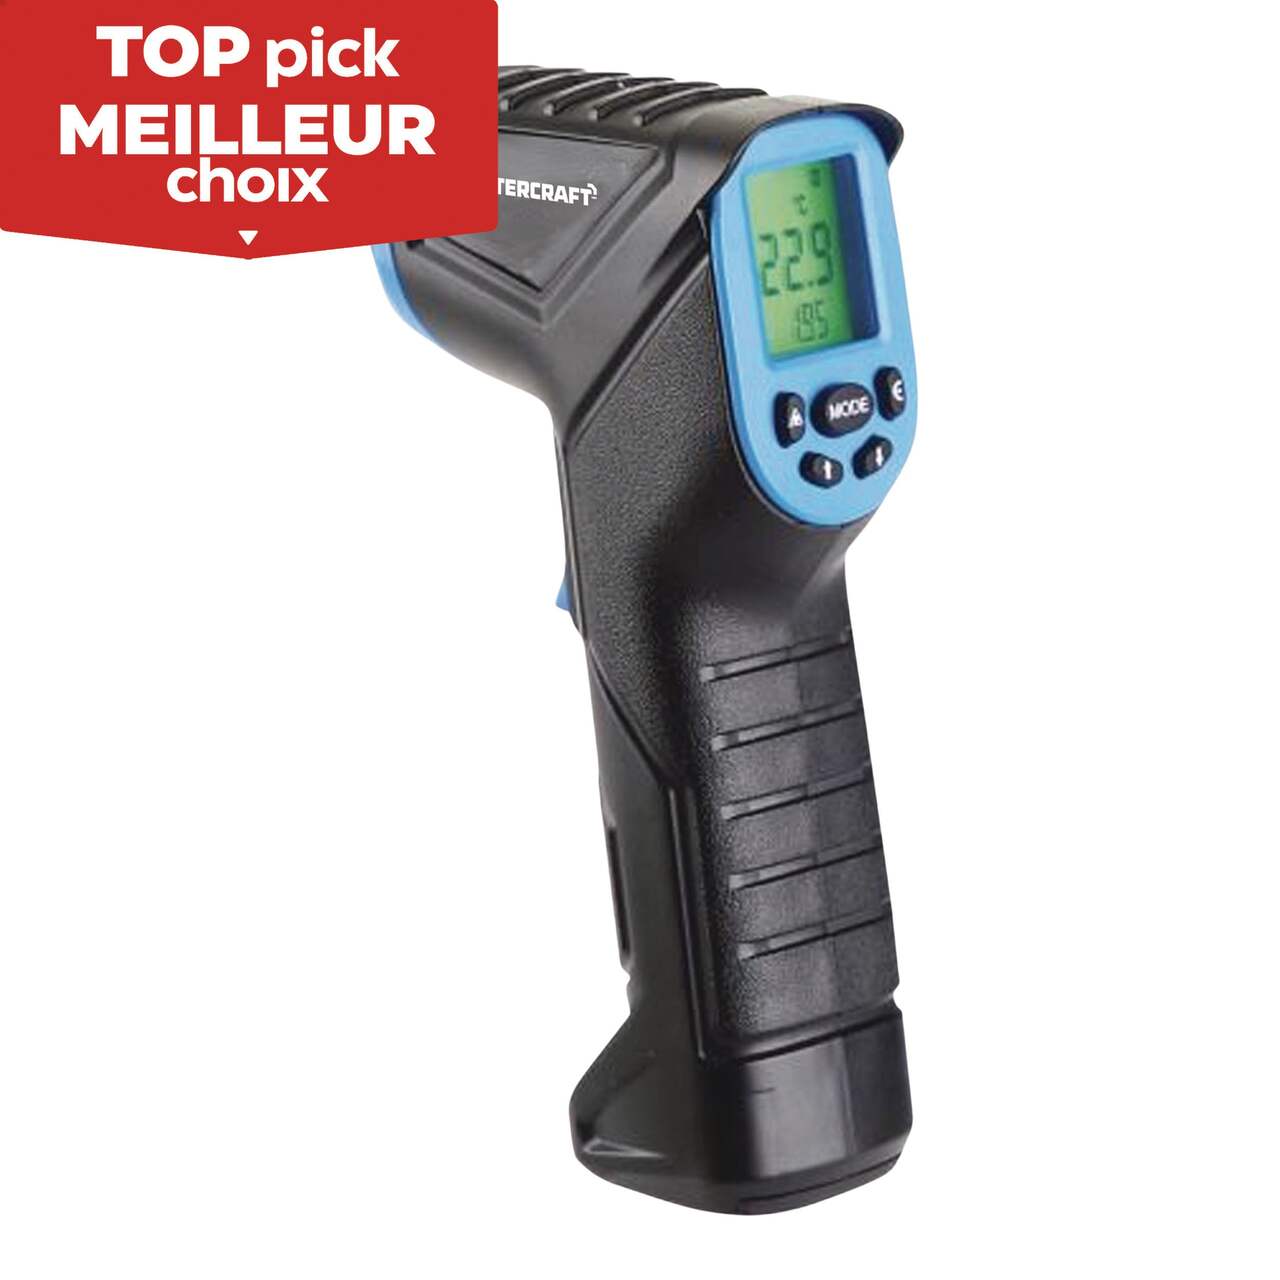 https://media-www.canadiantire.ca/product/fixing/tools/cutting-measuring/0574554/mastercraft-digital-temperature-reader-07233a35-1221-46e9-9958-de3c31075196-jpgrendition.jpg?imdensity=1&imwidth=640&impolicy=mZoom